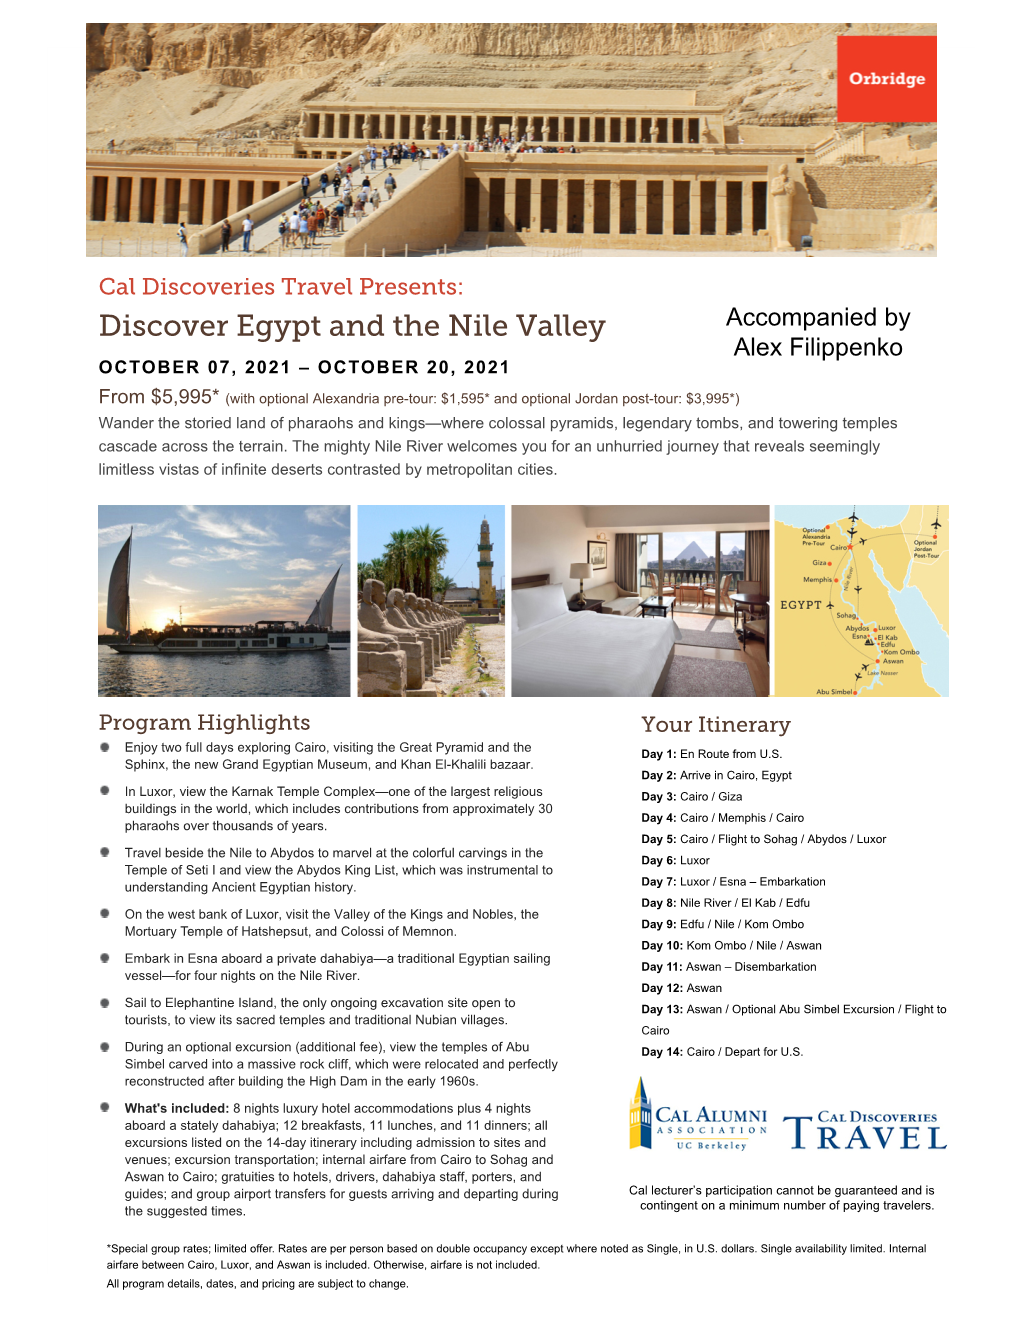 Discover Egypt and the Nile Valley Accompanied by Alex Filippenko OCTOBER 07, 2021 – OCTOBER 20, 2021